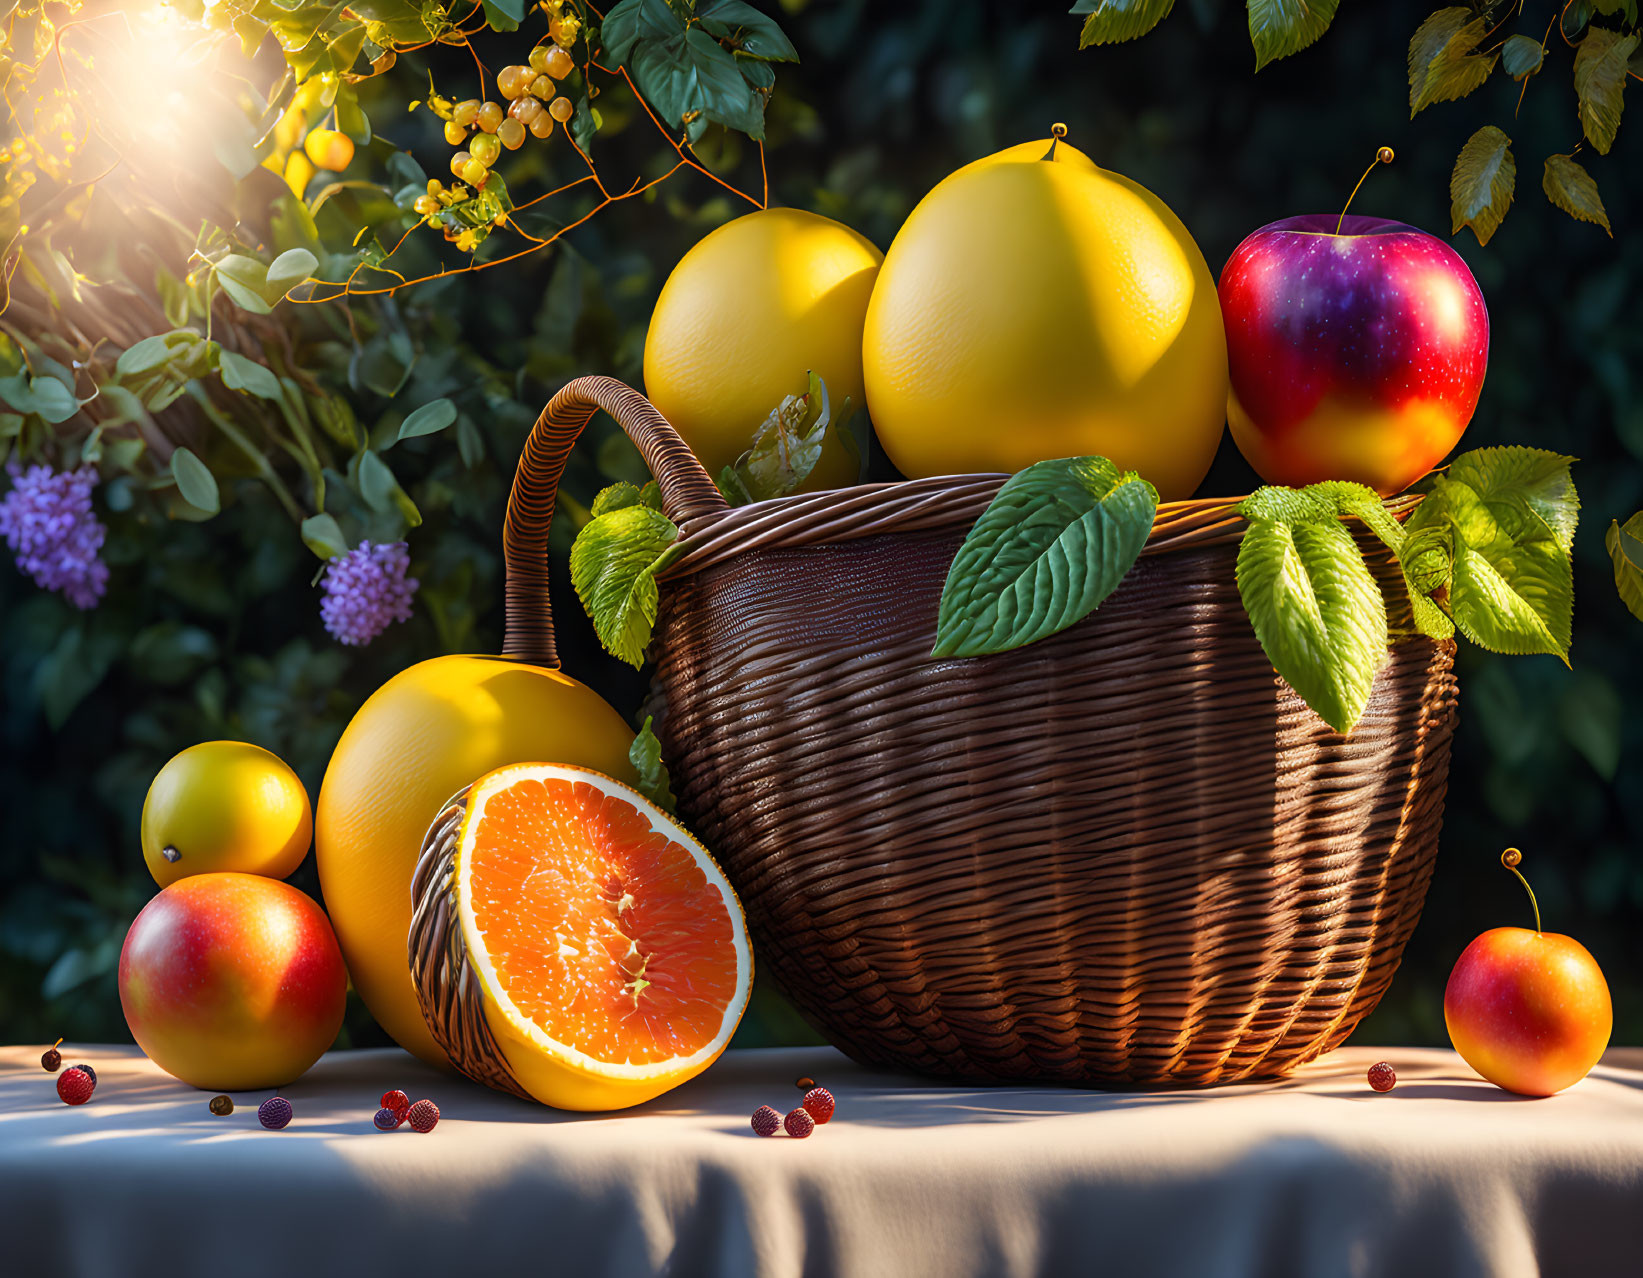 Stunning photo of a wicker basket with ripe fruits